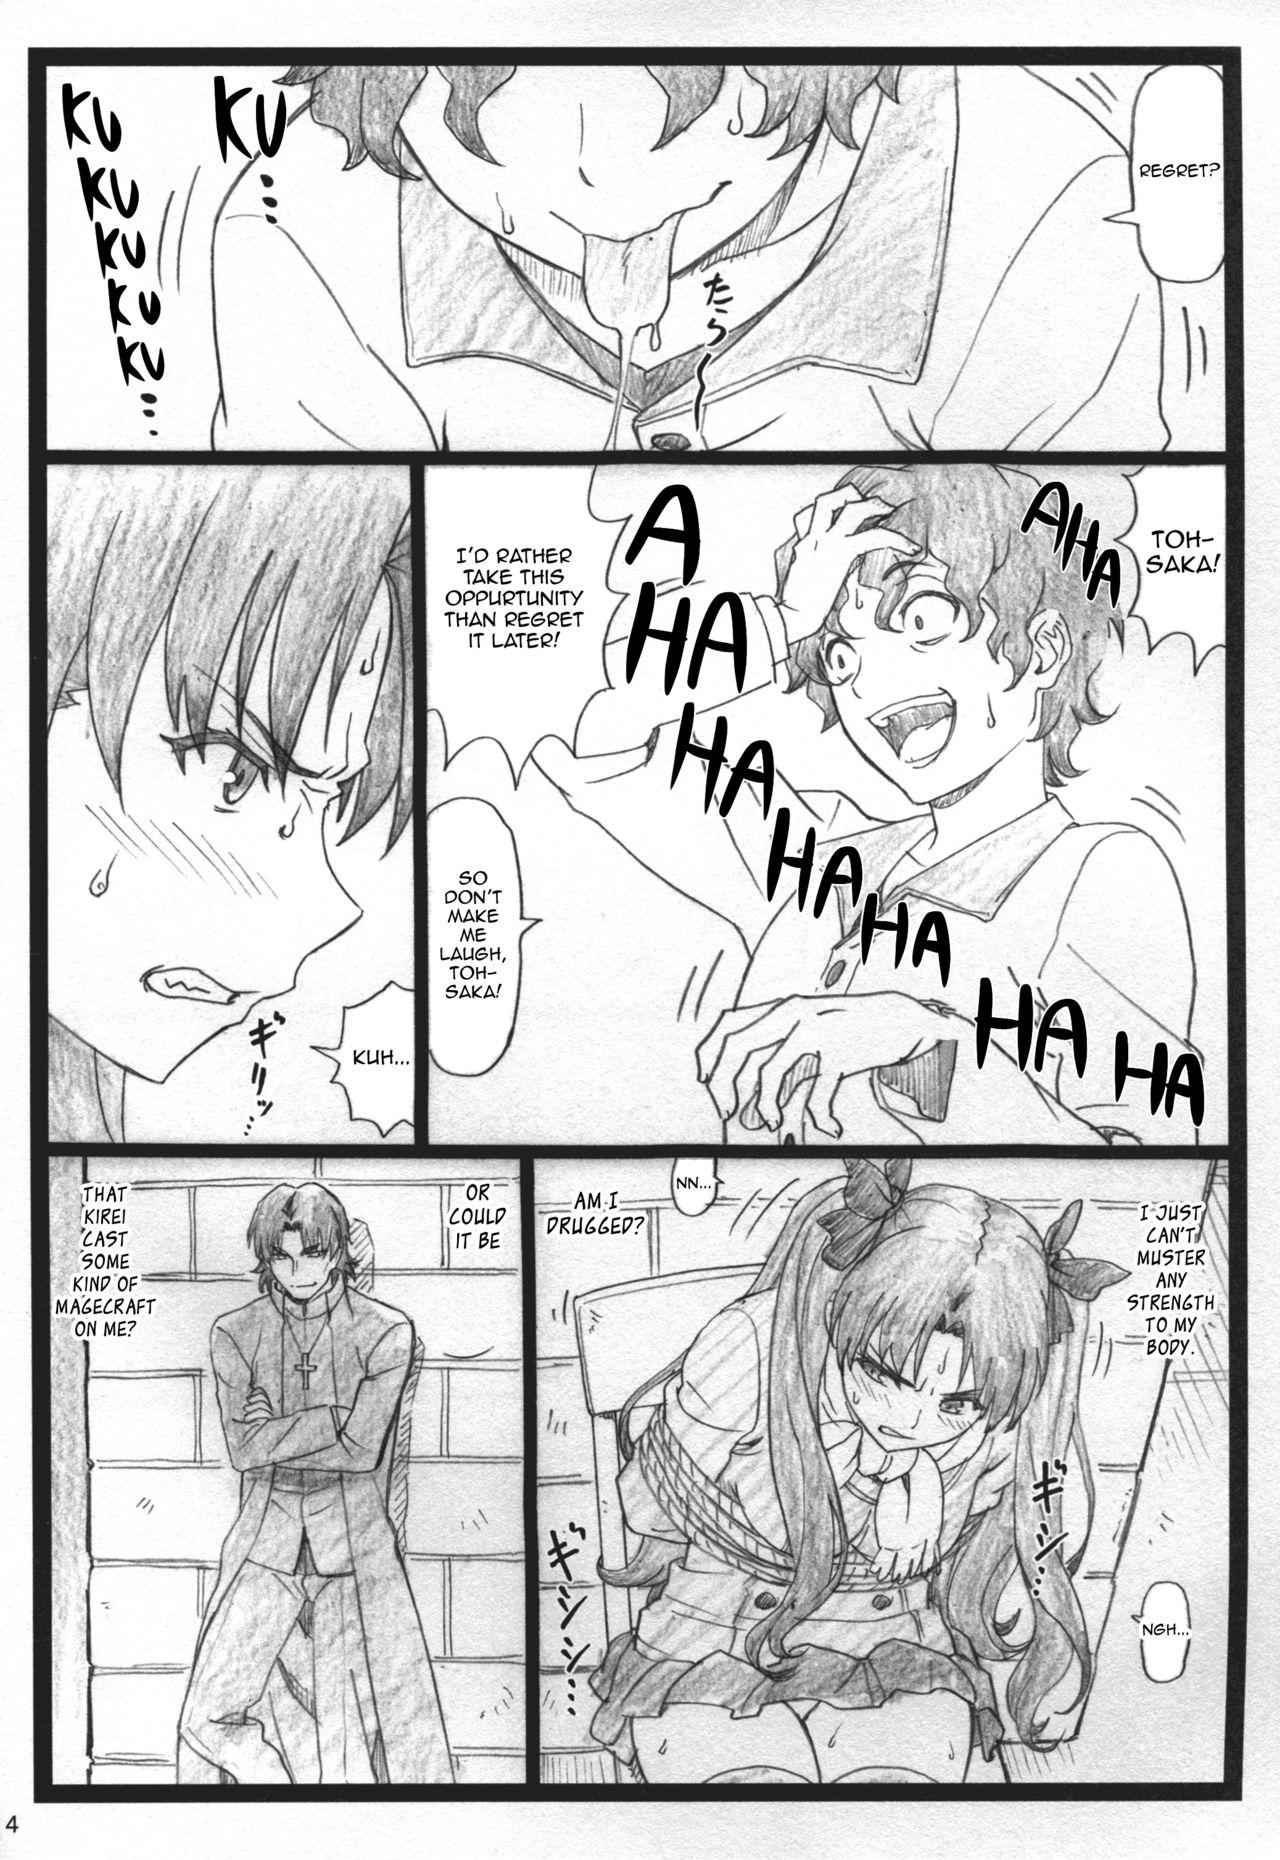 Danish Rin to Shite... | With Rin... - Fate stay night Fantasy - Page 4